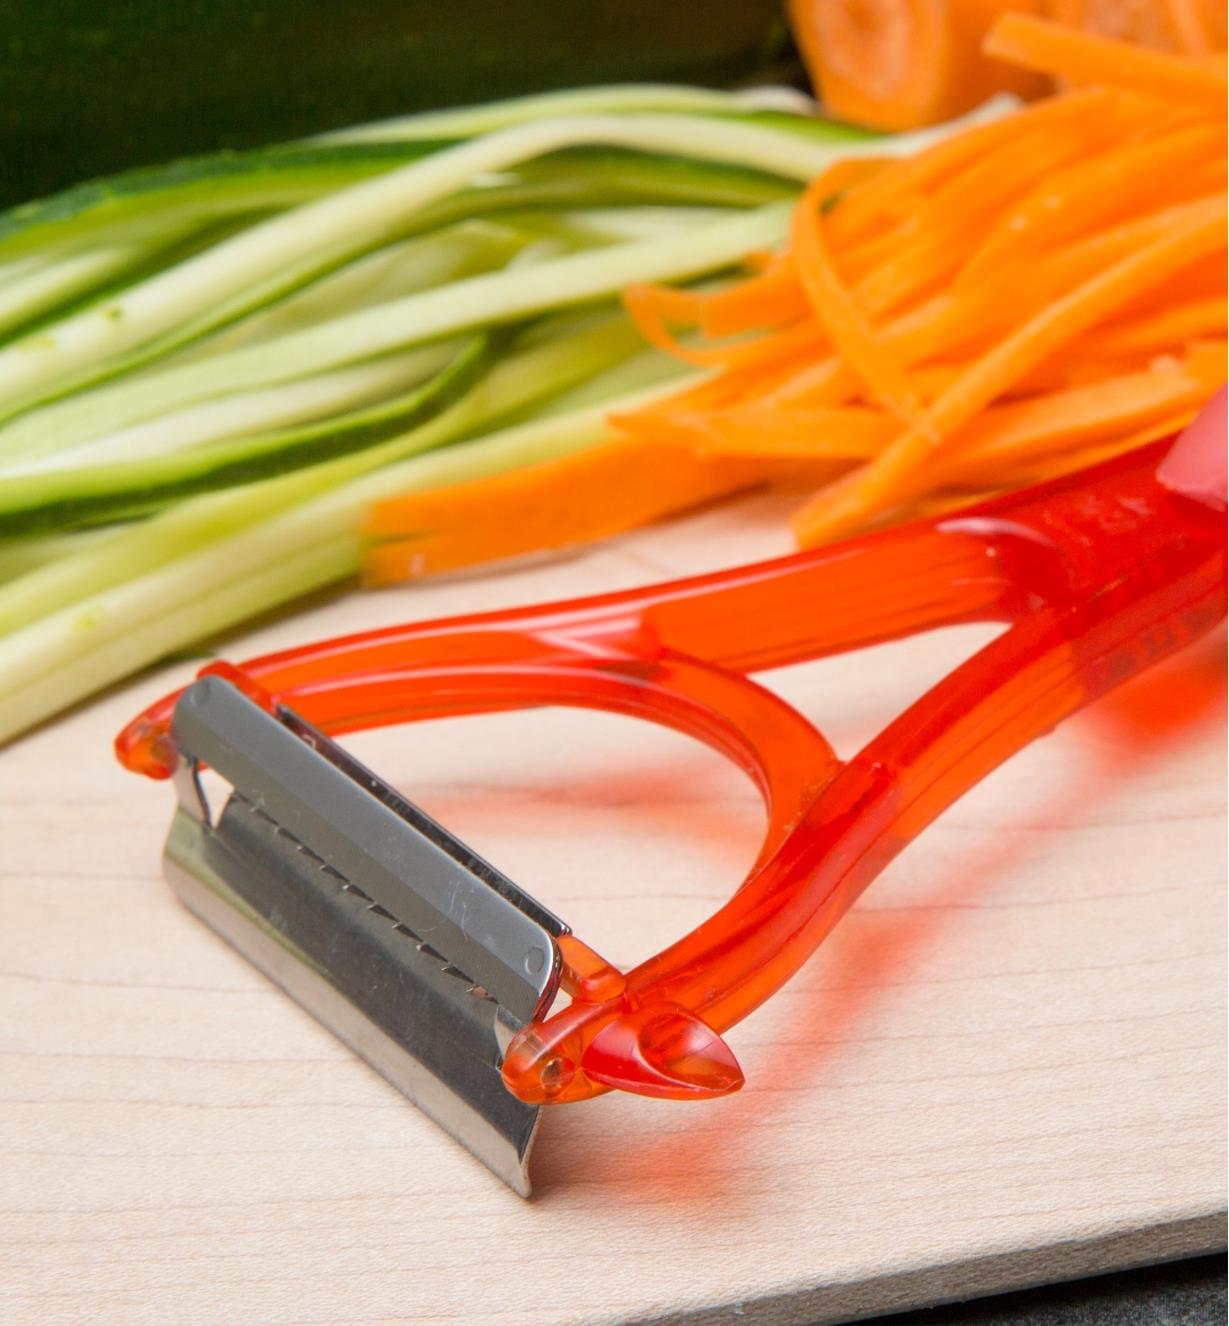 Julienne Peeler on a counter next to julienned carrots and beans